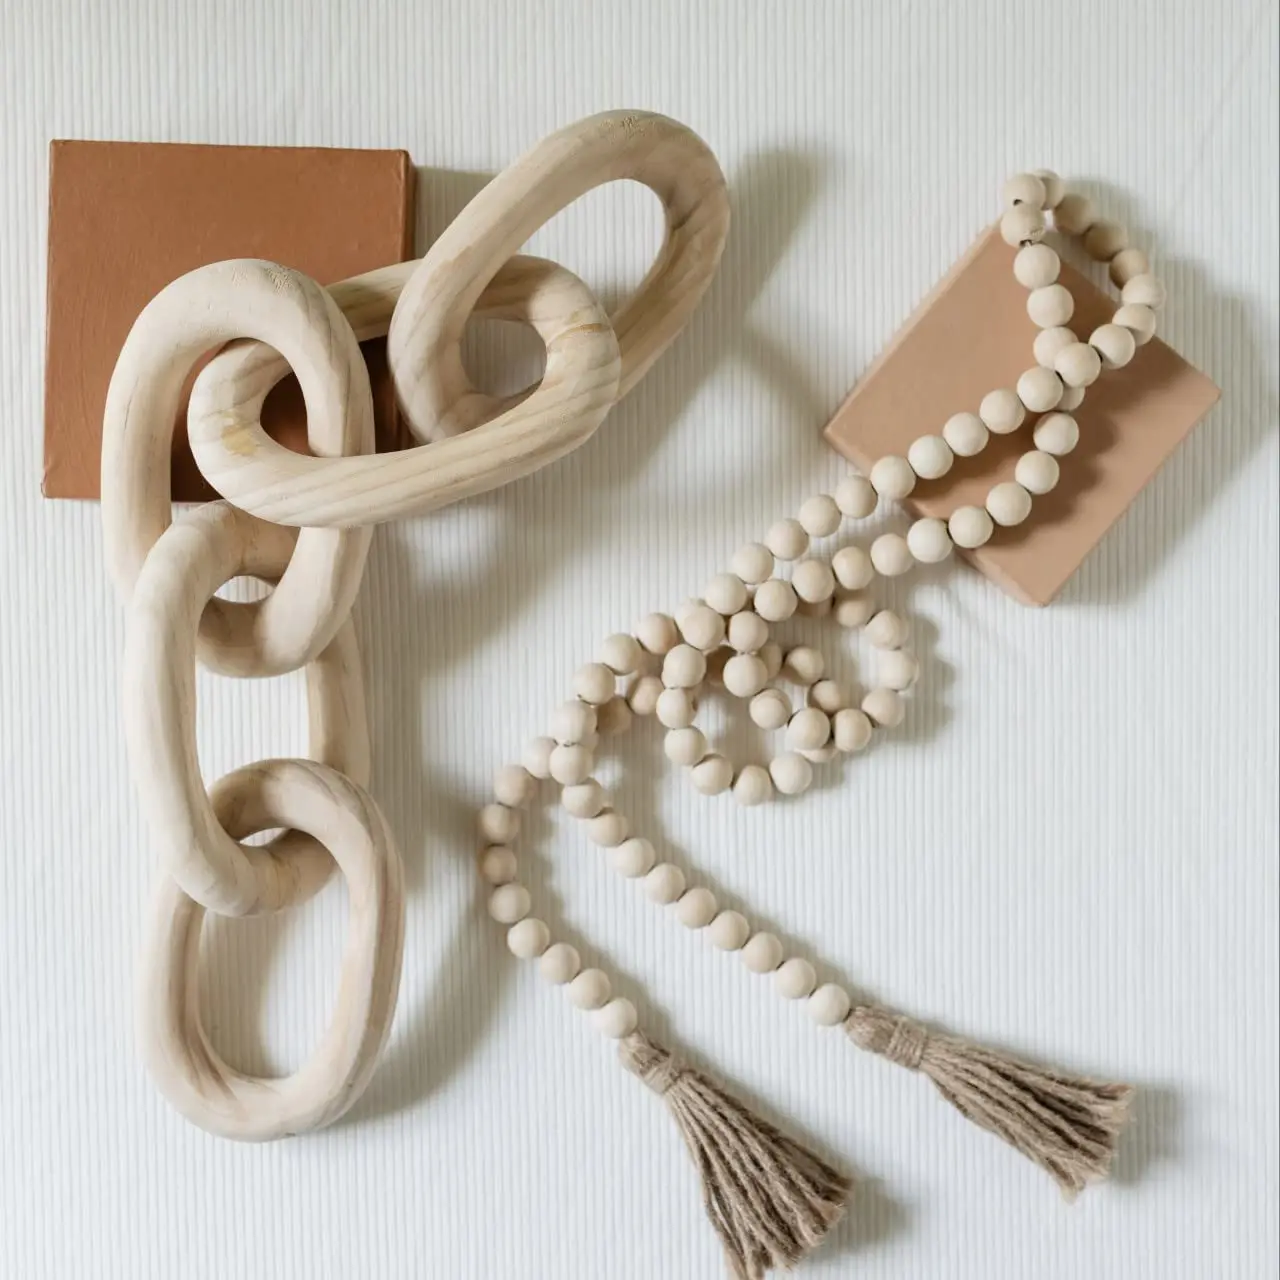 Boho Decorative Wood Chain Link and Bead Garland Set Natural Hand Carved Wood Chain Aesthetic Modern Farmhouse Decor Set (1600506576503)